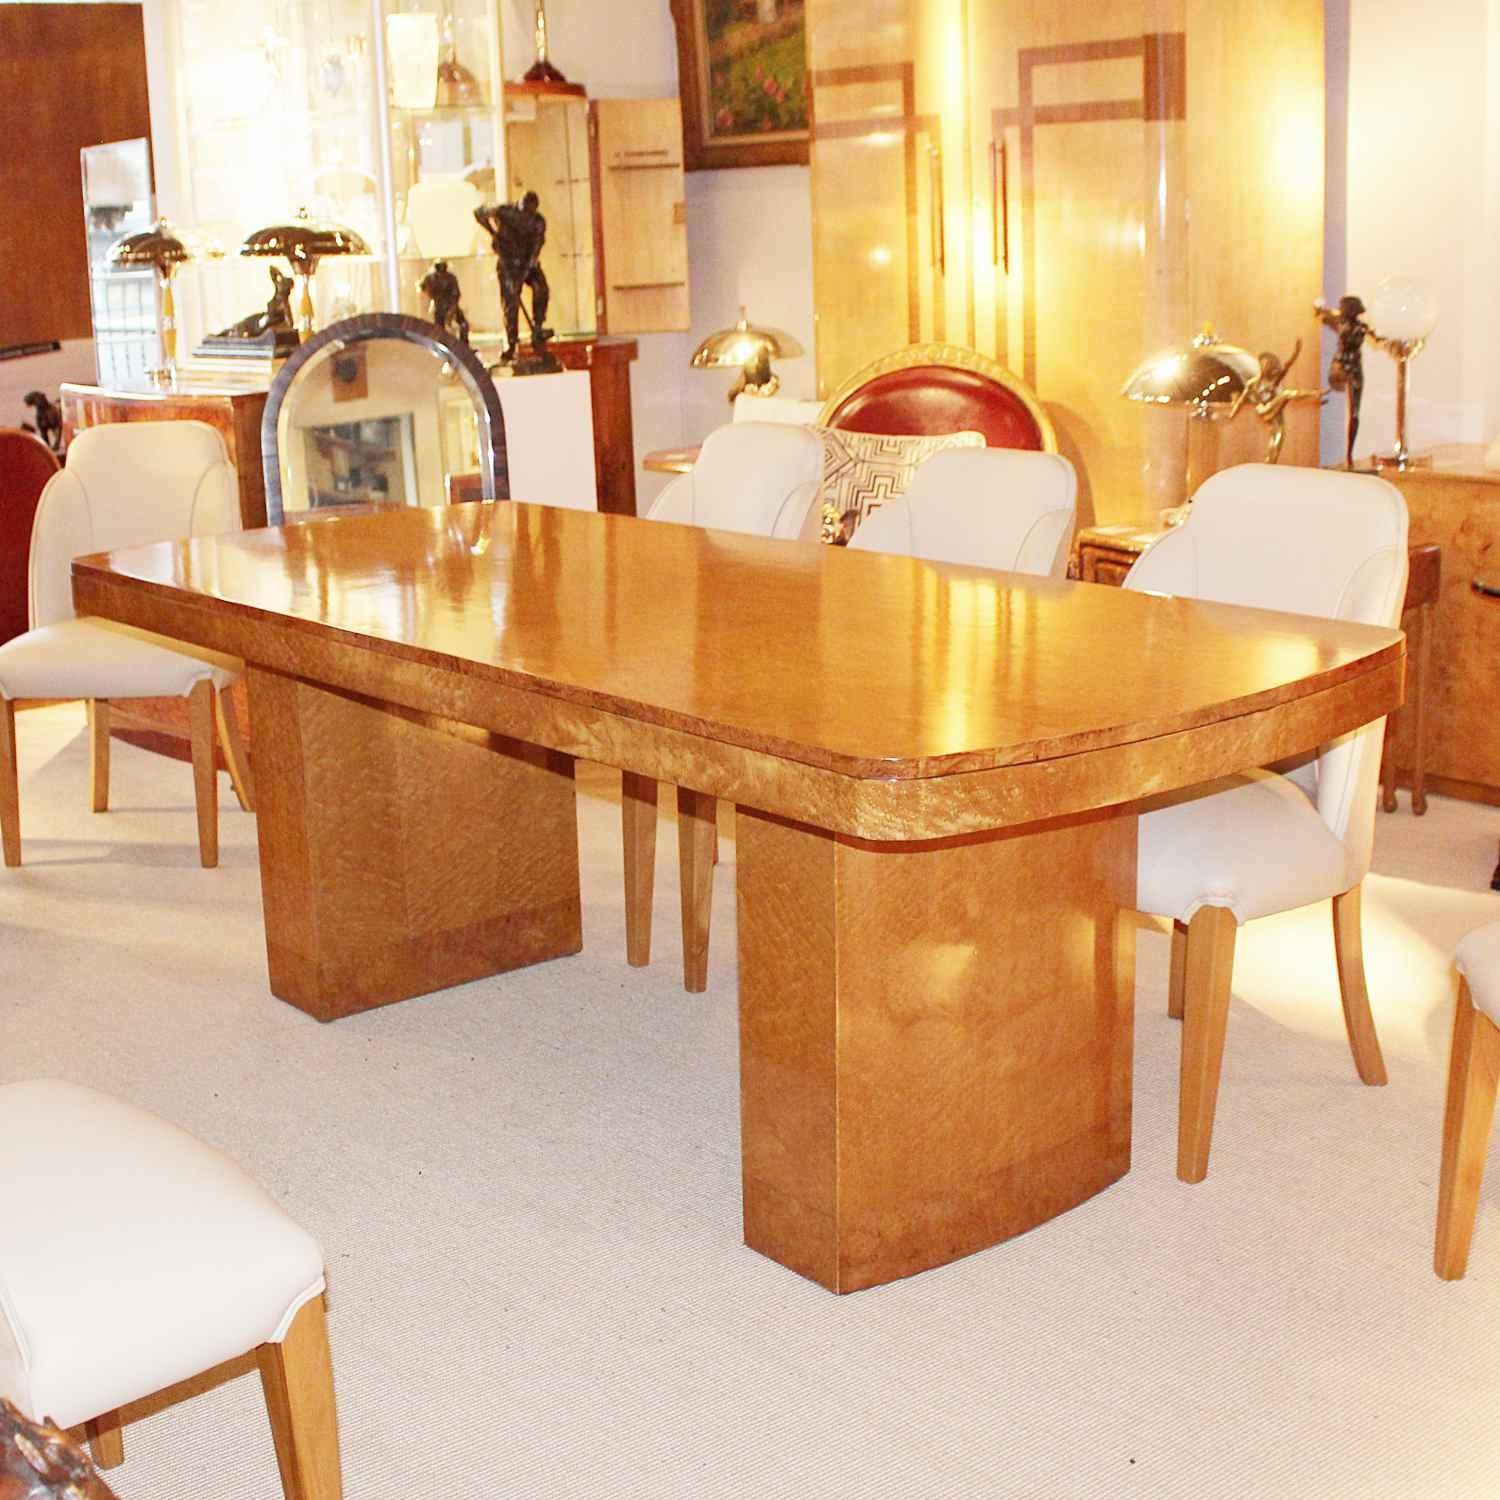 An Art Deco dining table with eight chairs. Table set over curved pedestals. Cloud form chairs upholstered in cream leather and Alcantara suede. Figured bird's-eye maple throughout.
Dimensions:
Table H 76cm, L 213.5cm, W 91cm
Chairs H 89cm, W